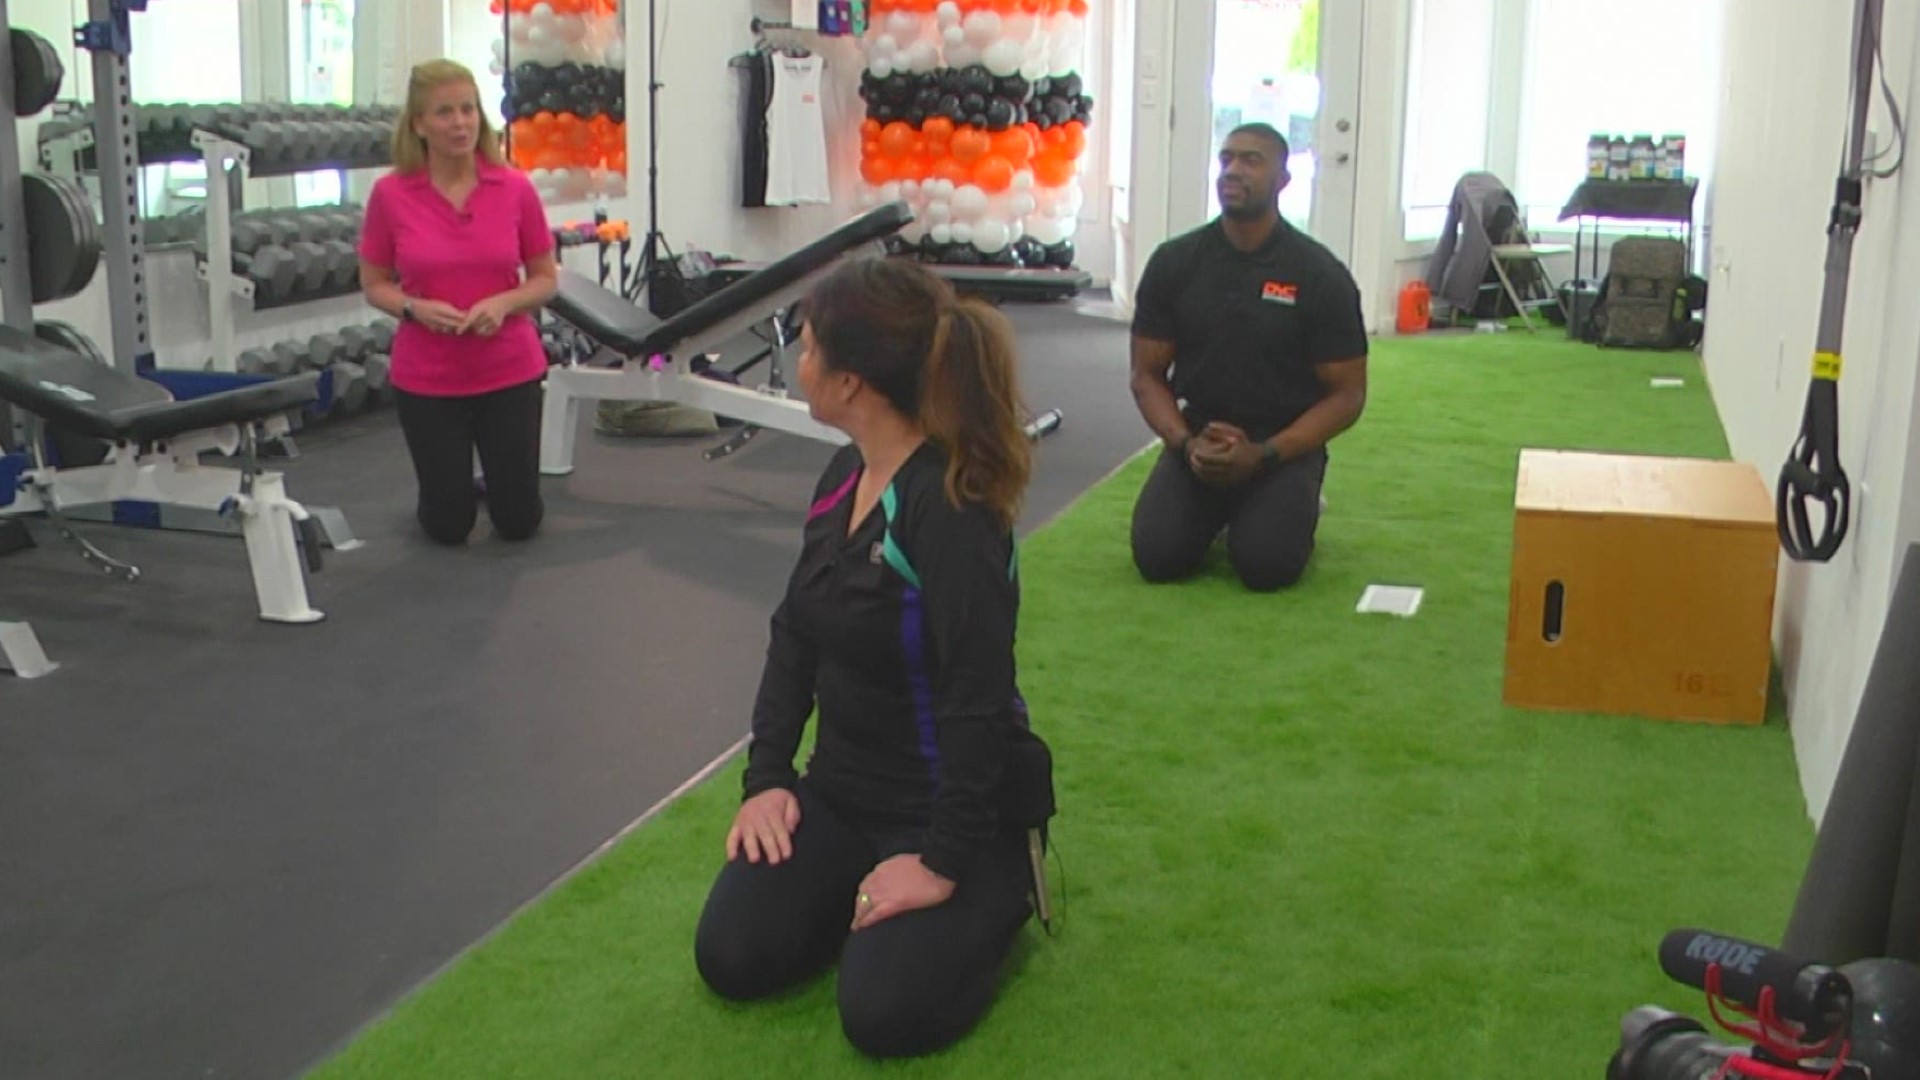 Kelly Greene, a certified fitness instructor, has a suggestion for your morning warm-up.